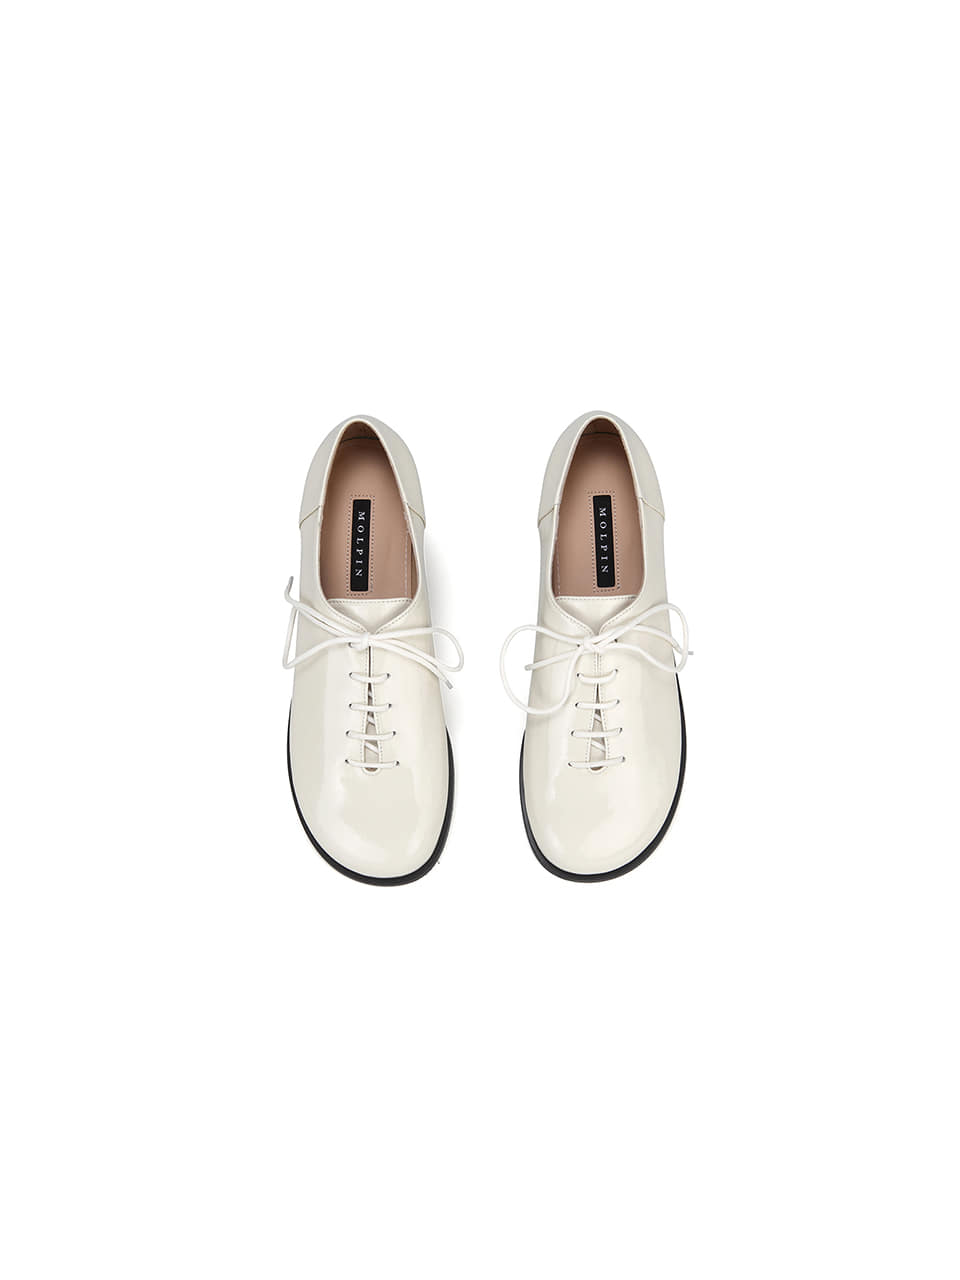 Cring Laceup Loafer_22014_ivory